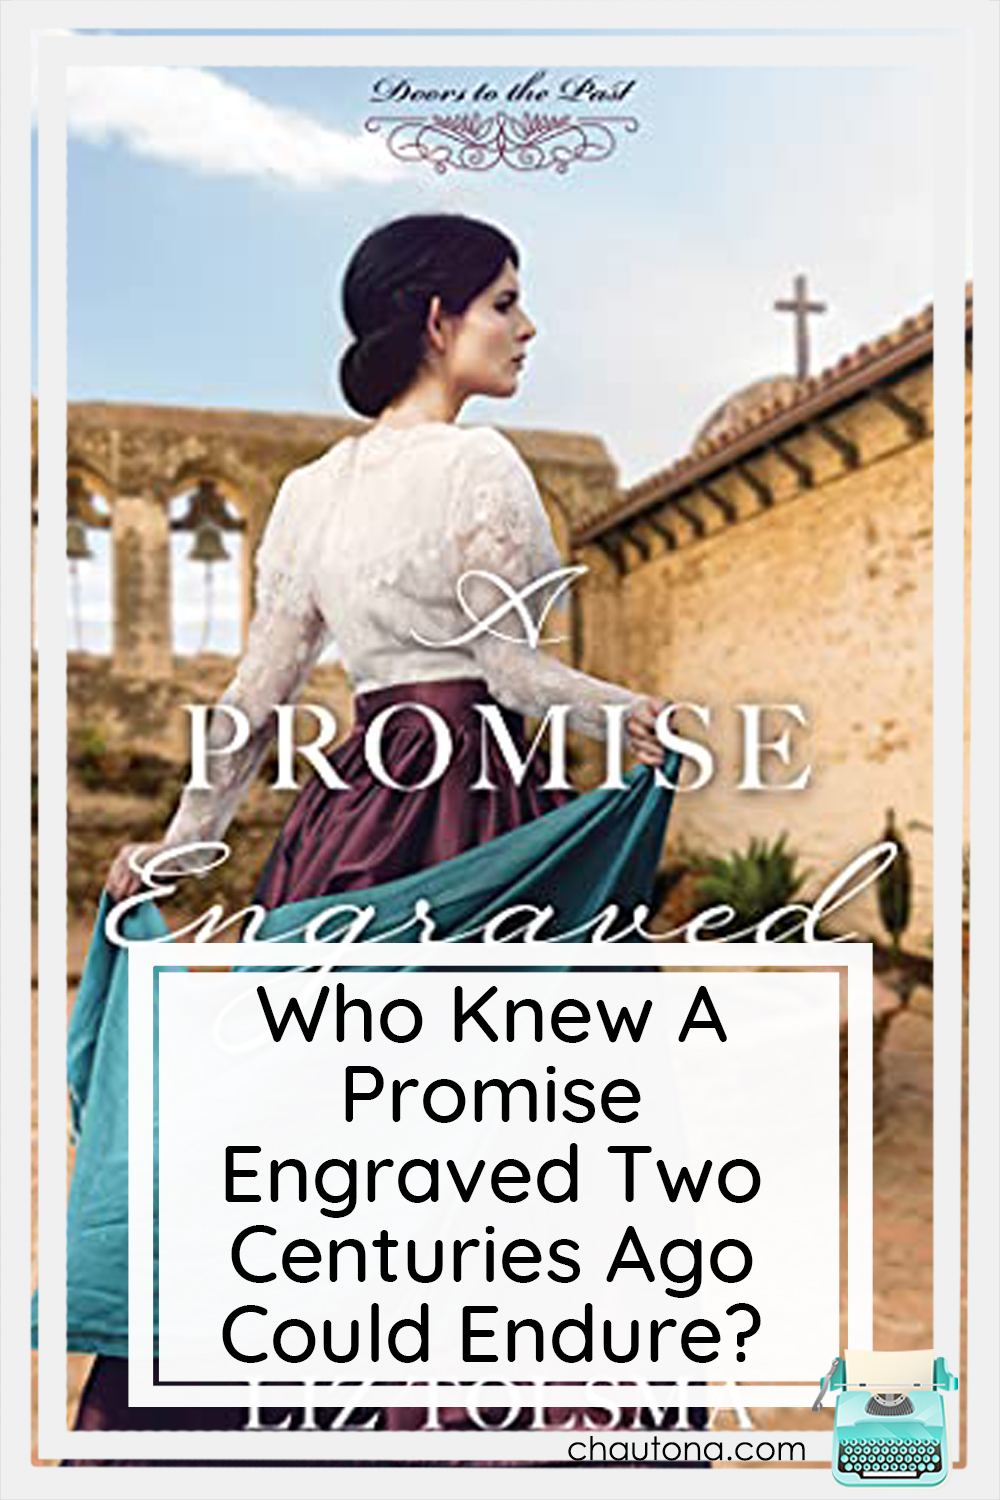 A Promise Engraved promises a great read and it delivers. Live through the battle at the Alamo AND the battle being waged there today. via @chautonahavig